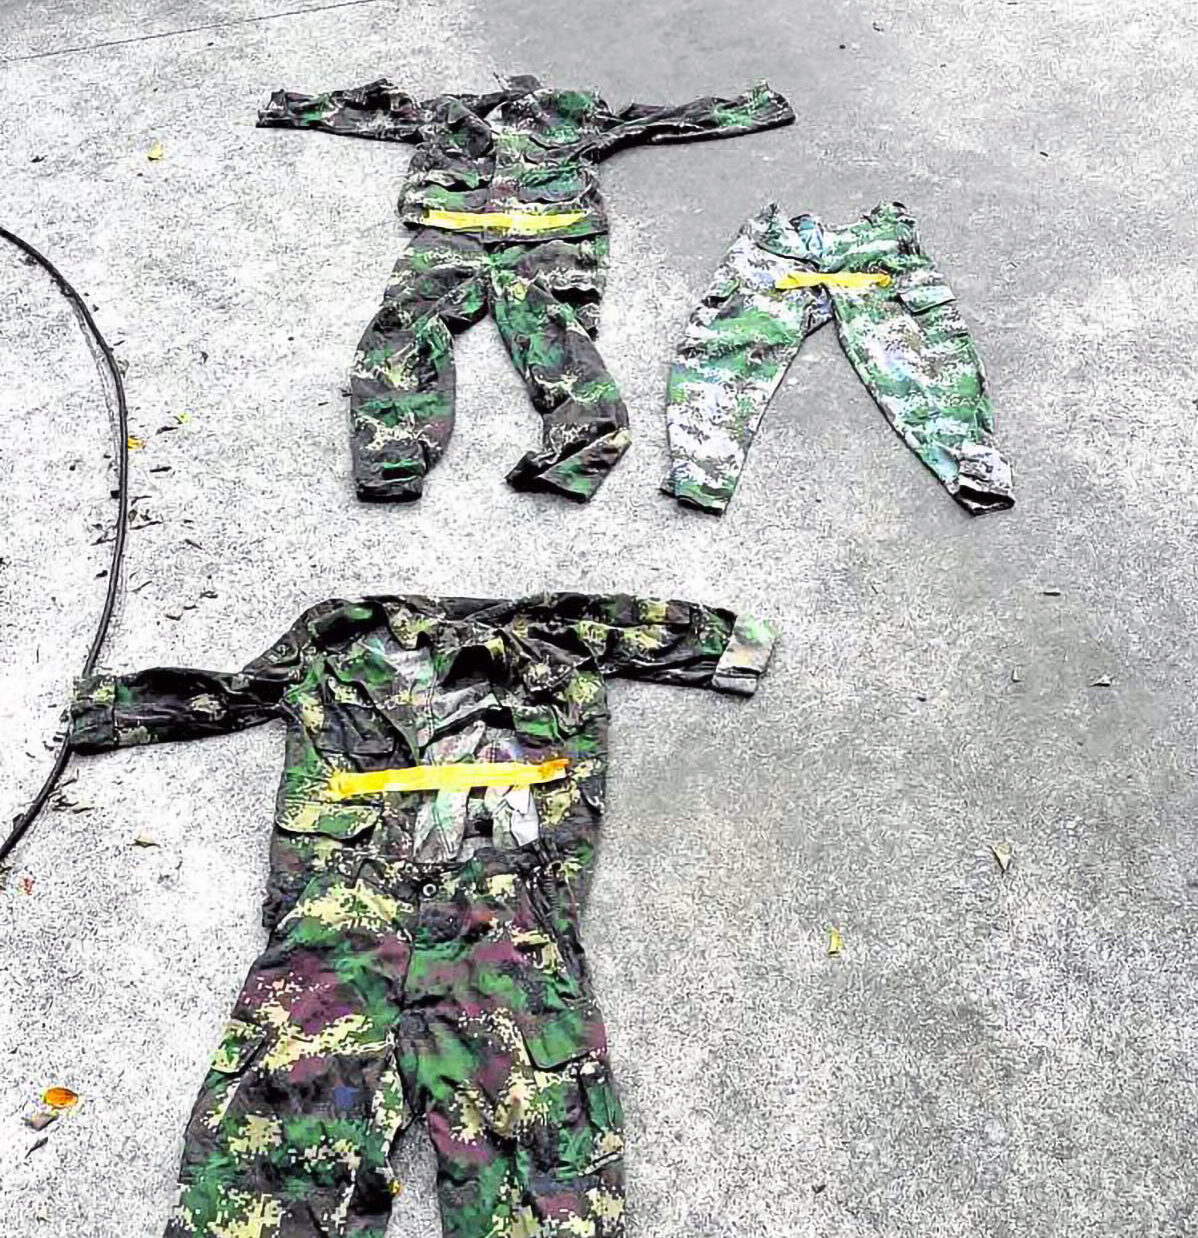 Pogo raid yields ‘PLA uniforms’; probably just props, says military